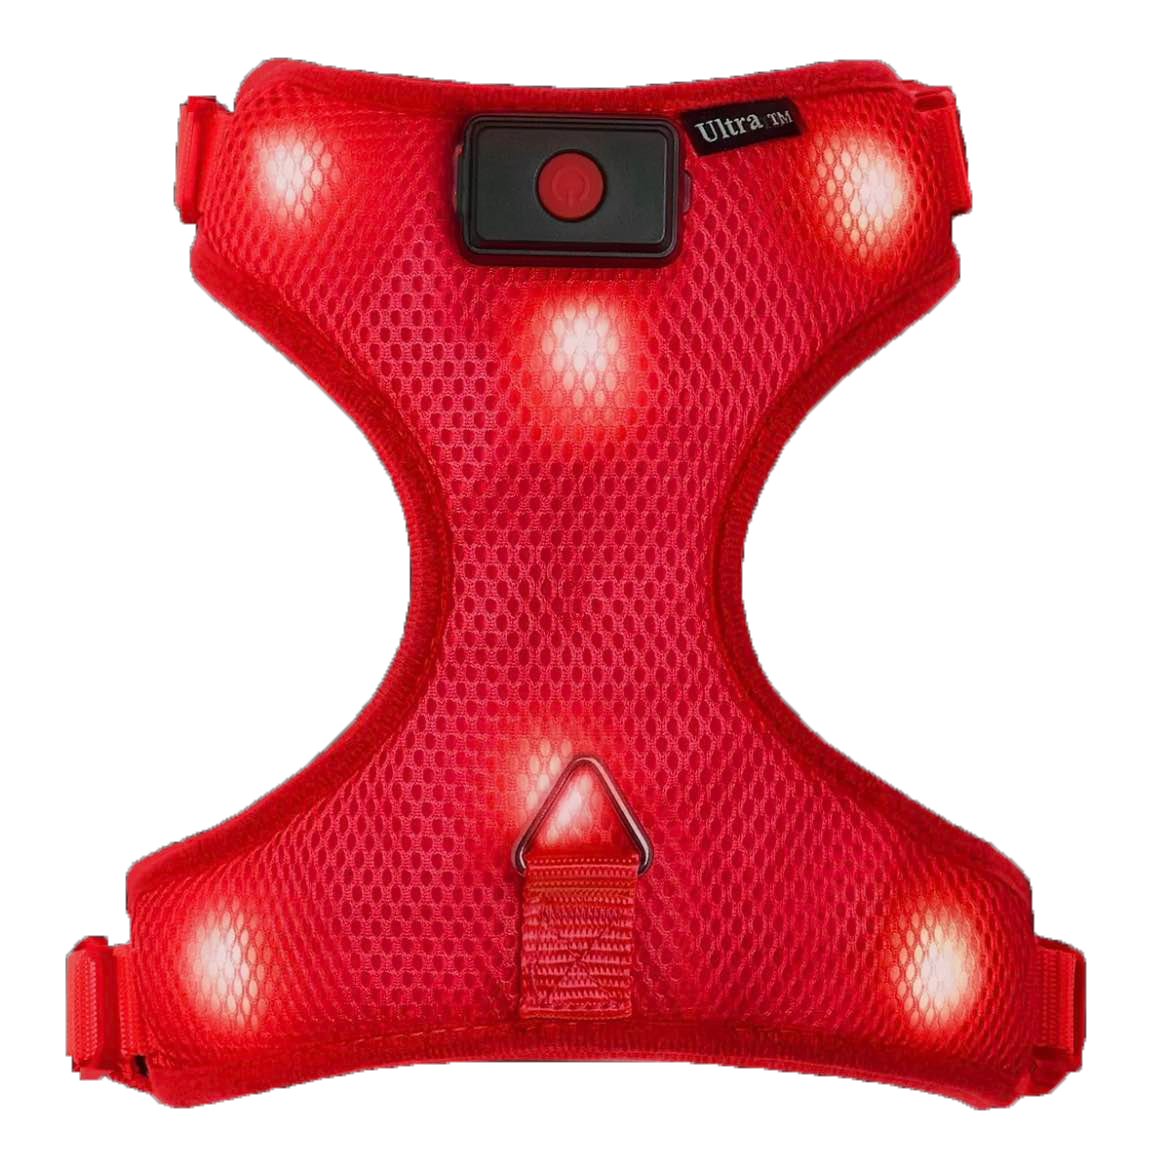 LED Dog Harness - Small (Red)